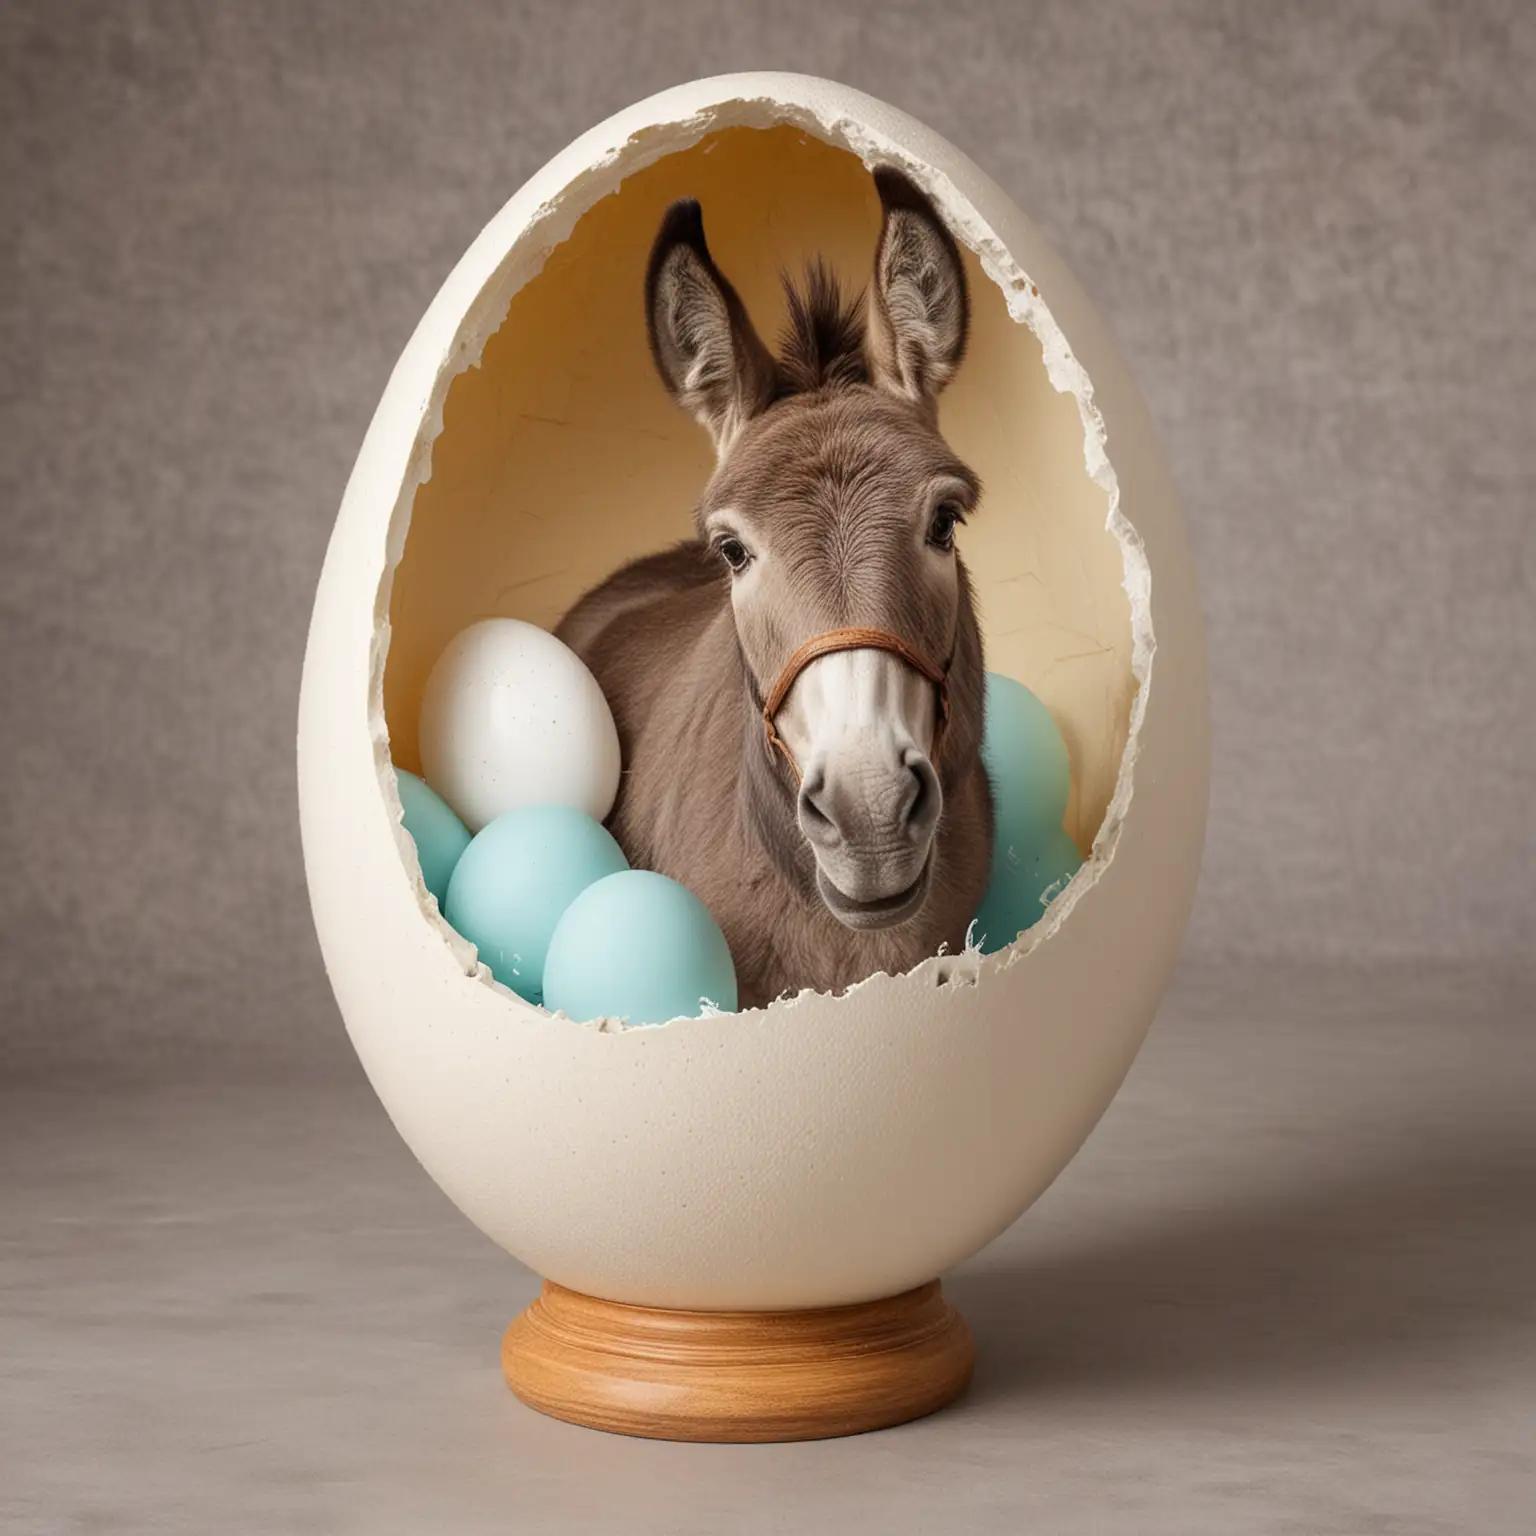 Donkey in the egg